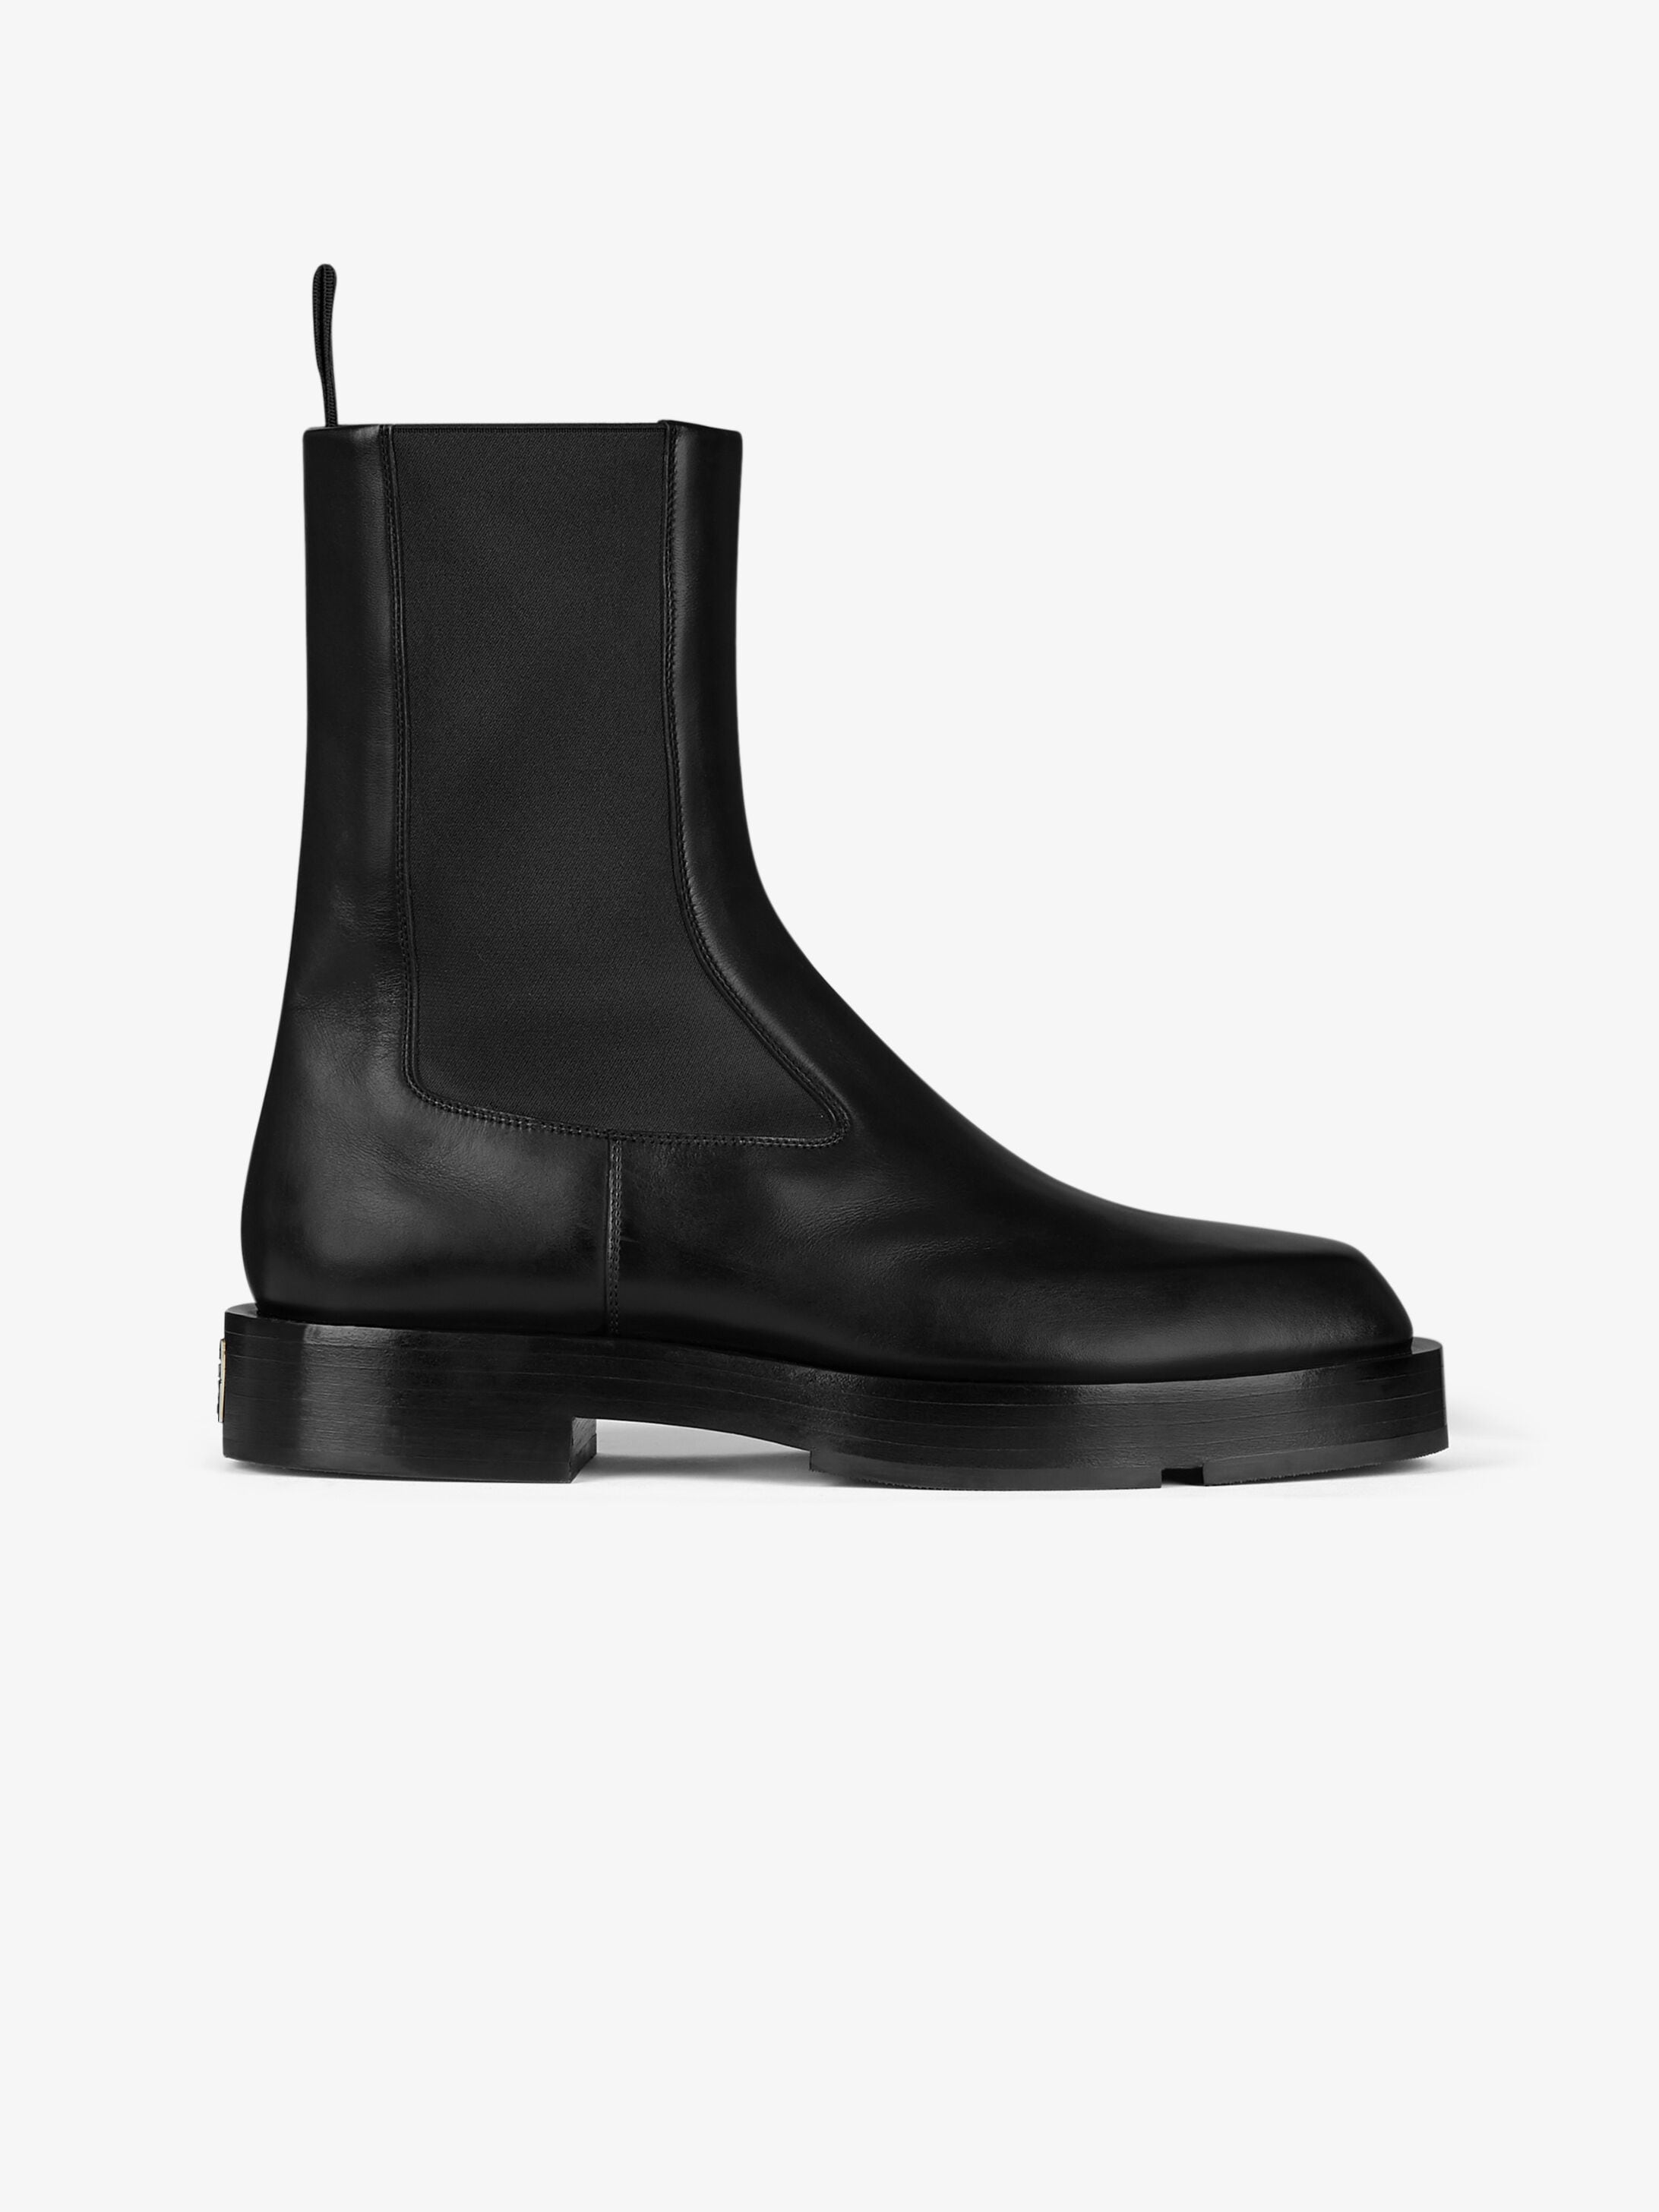 givenchy winter boots